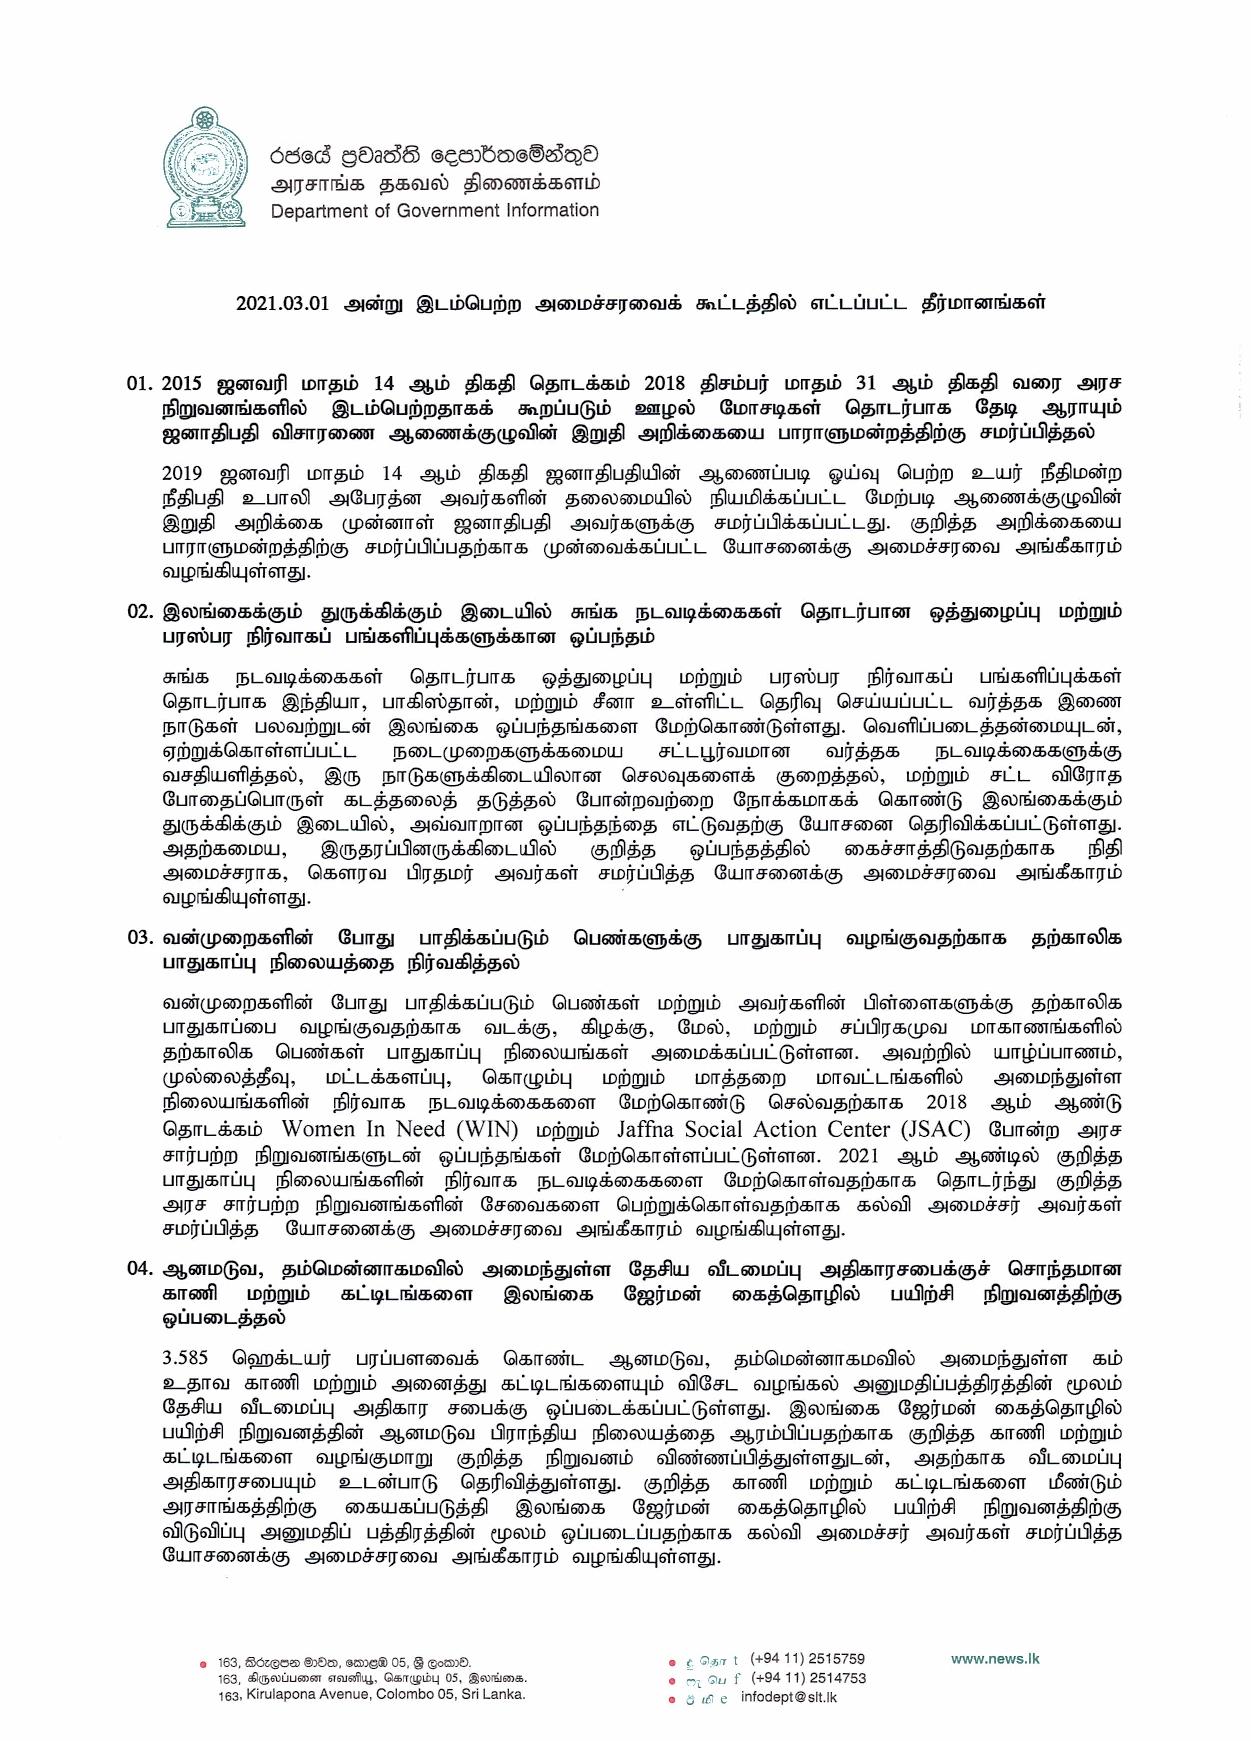 Cabinet Decision on 01.03.2021 Tamil page 001